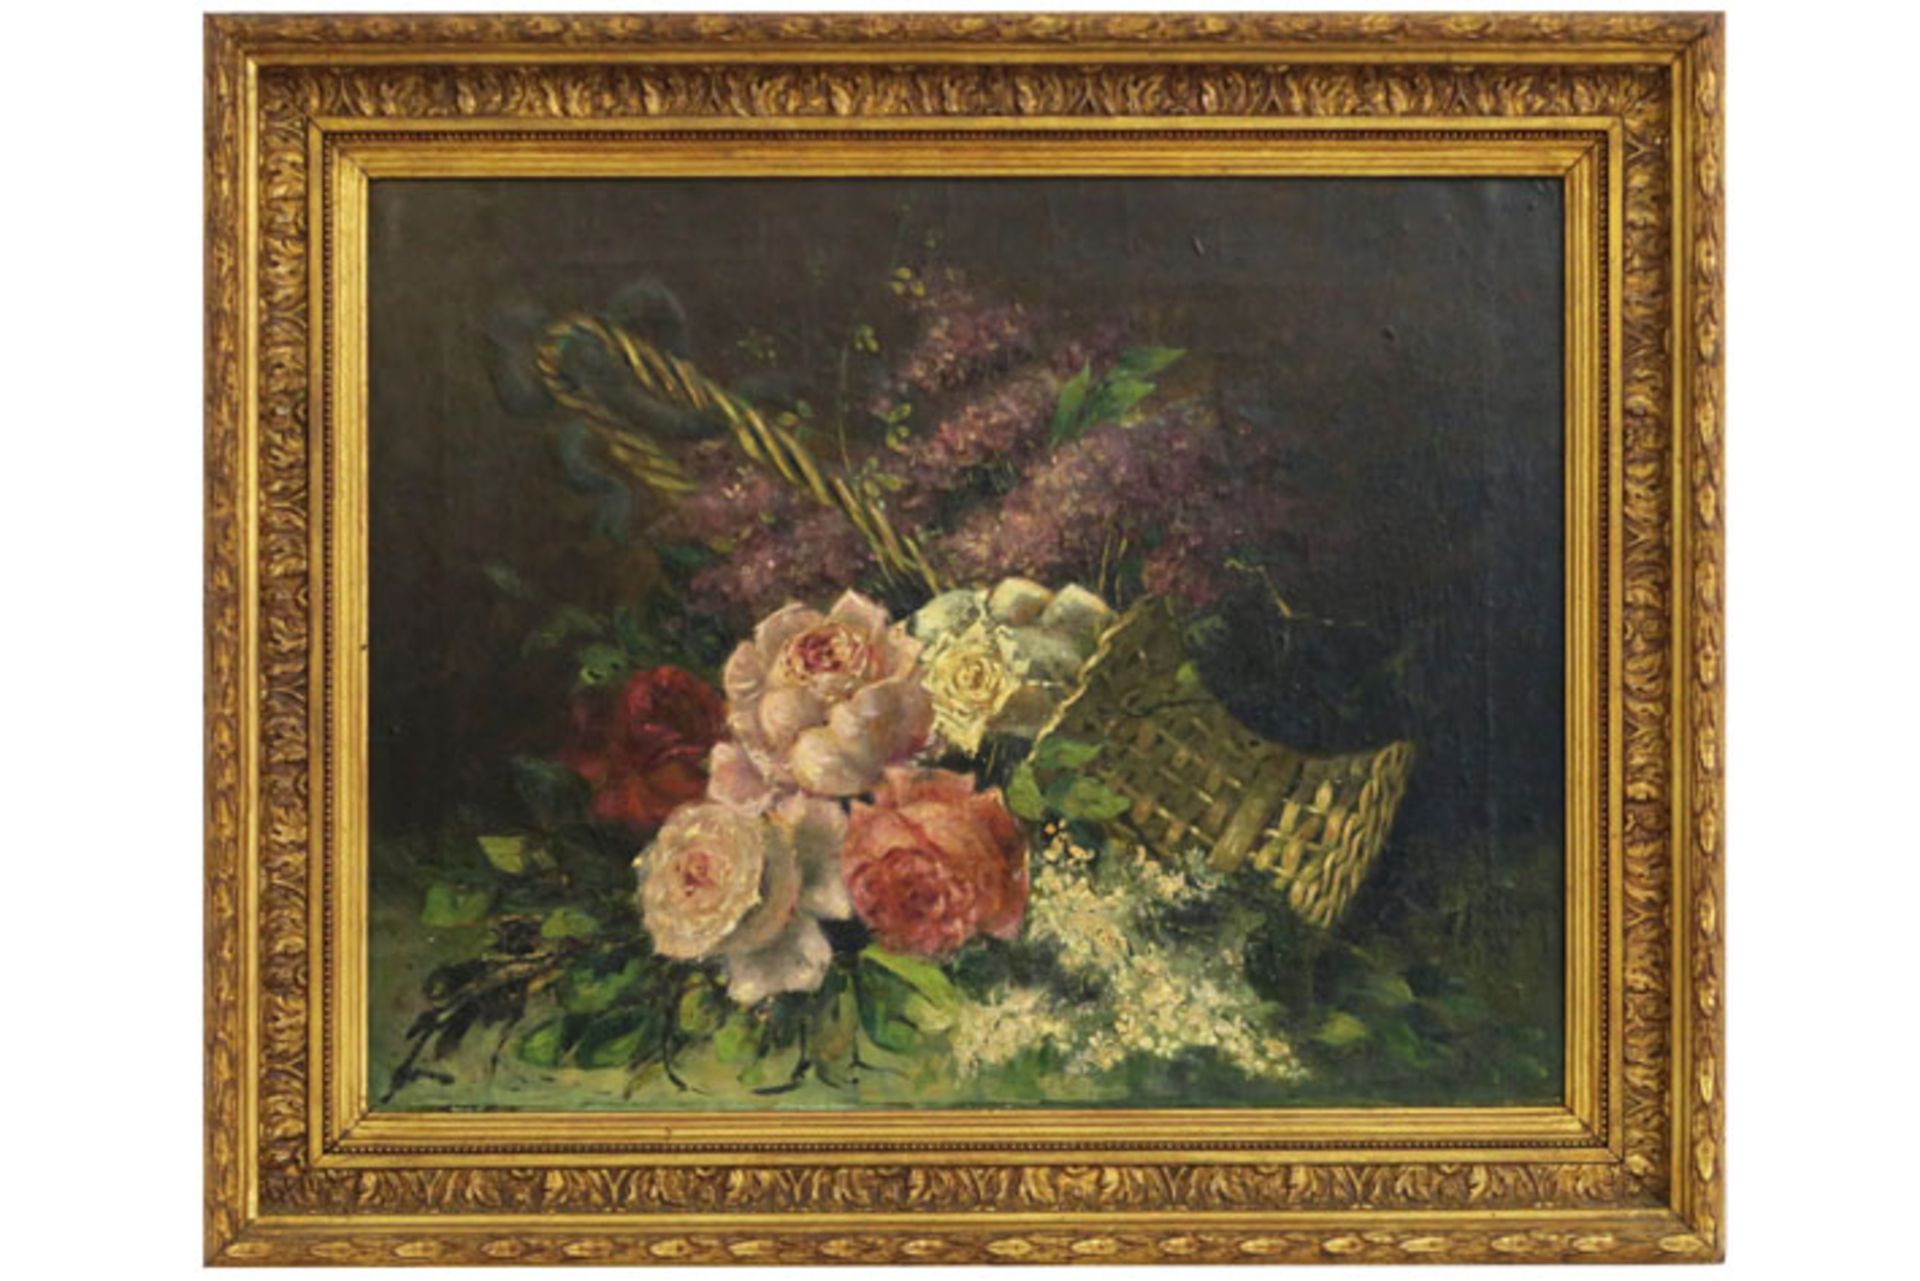 late 19th Cent. oil on canvas - signed Gerhard Blom and dated 1890 - - BLOM [...]